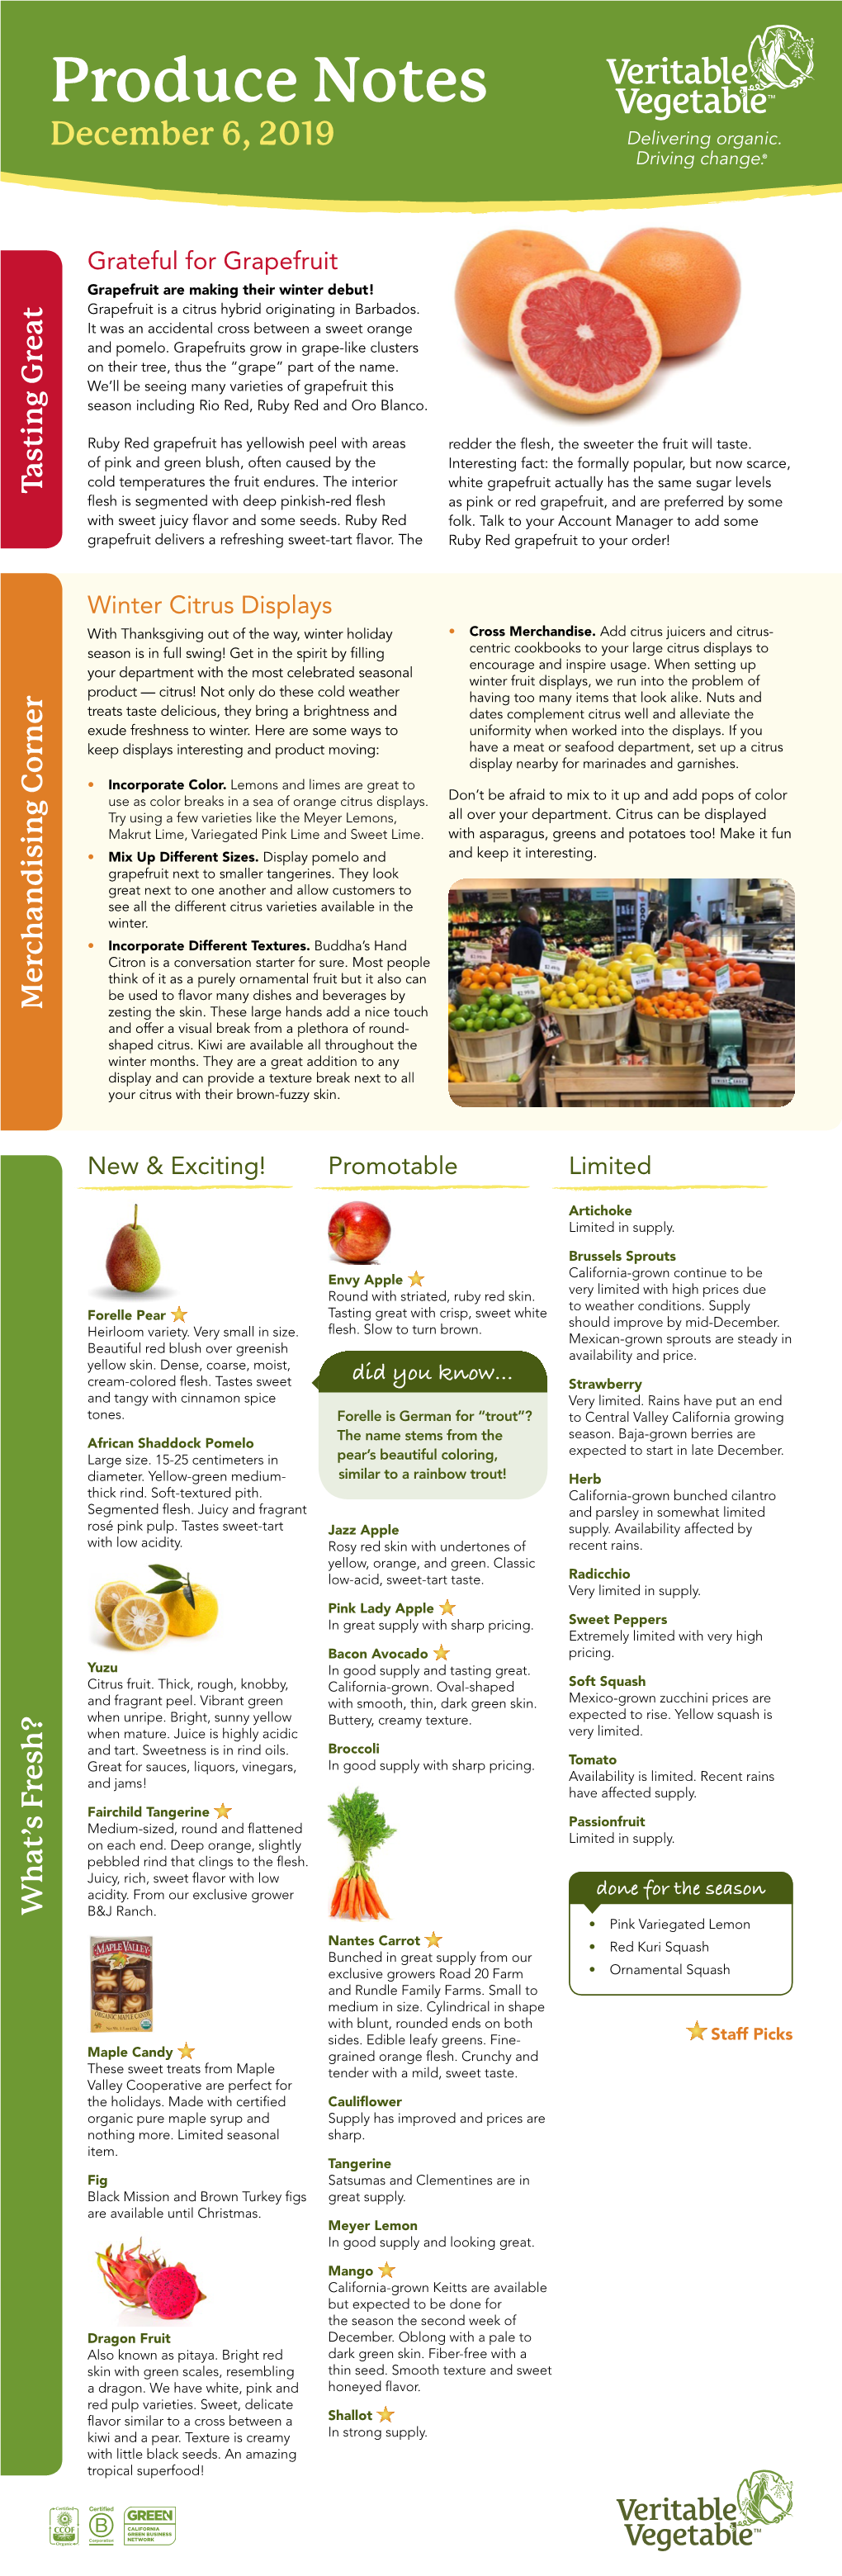 Produce Notes December 6, 2019